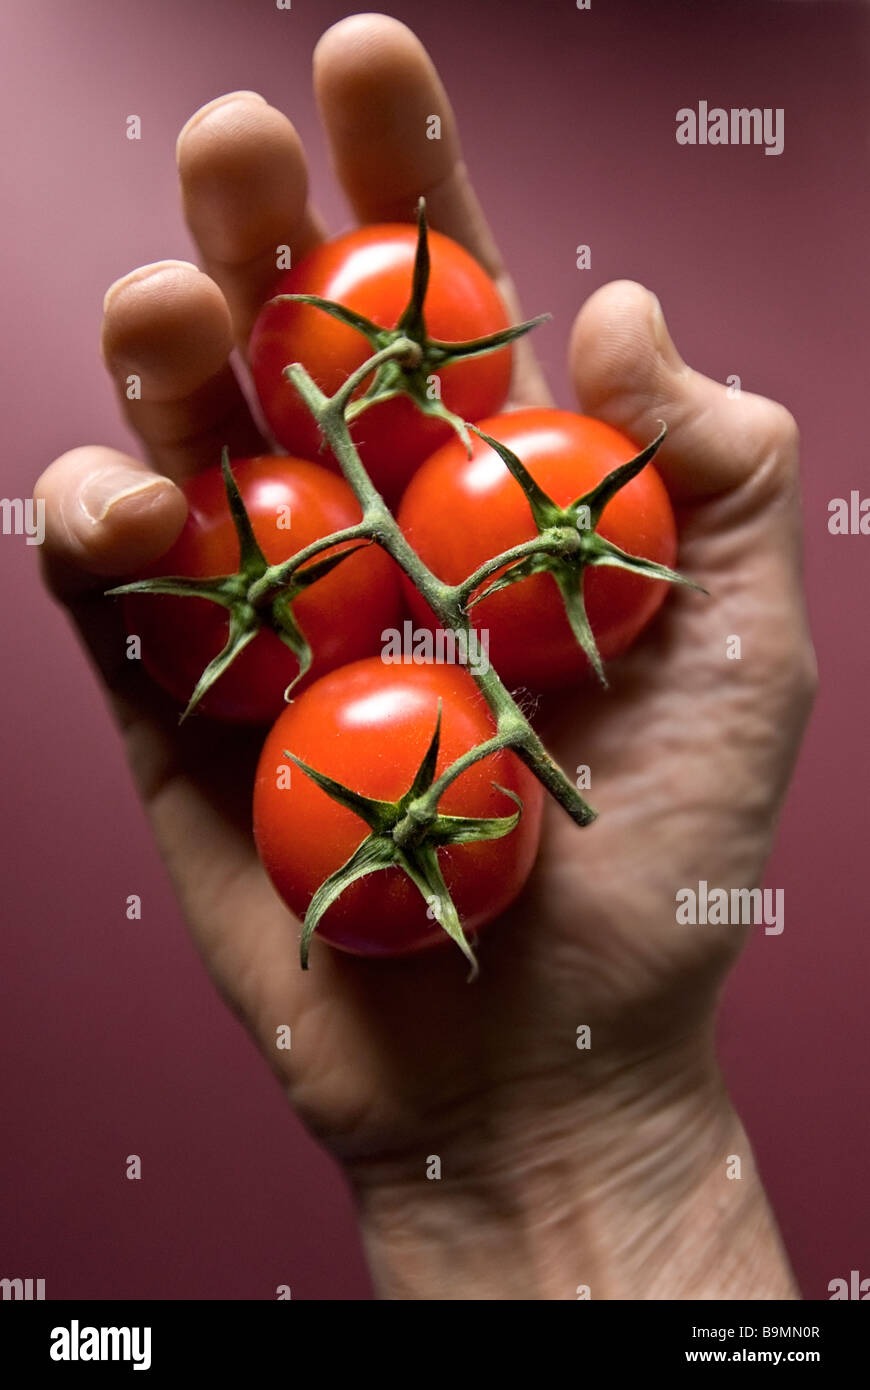 hand holding group of hothouse tomatoes Stock Photo